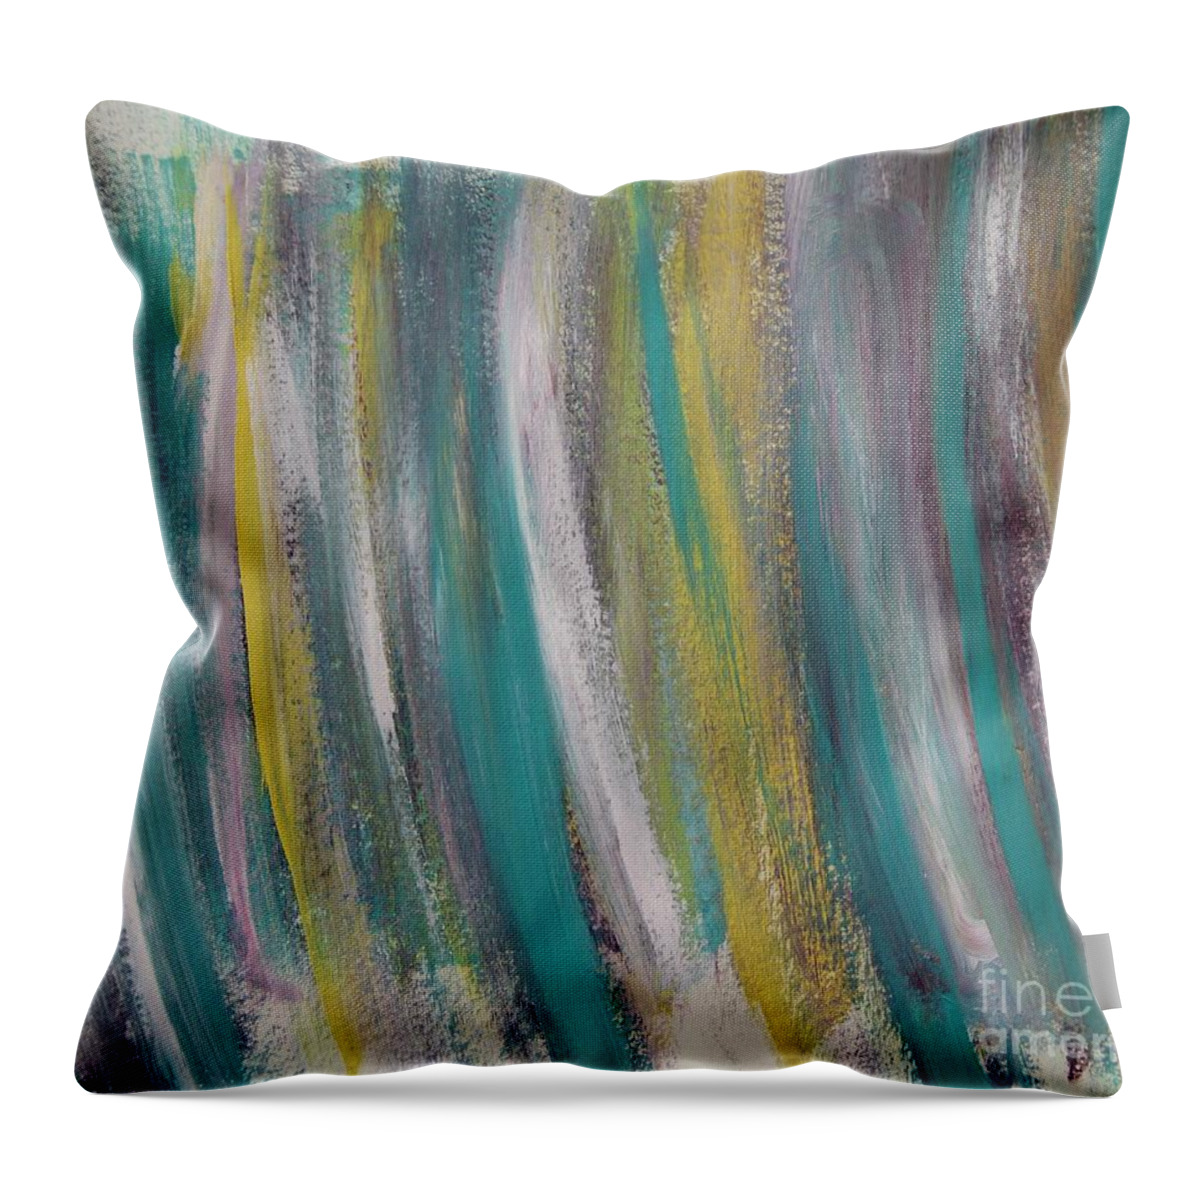 90s Throw Pillow featuring the painting Watery by Marina McLain